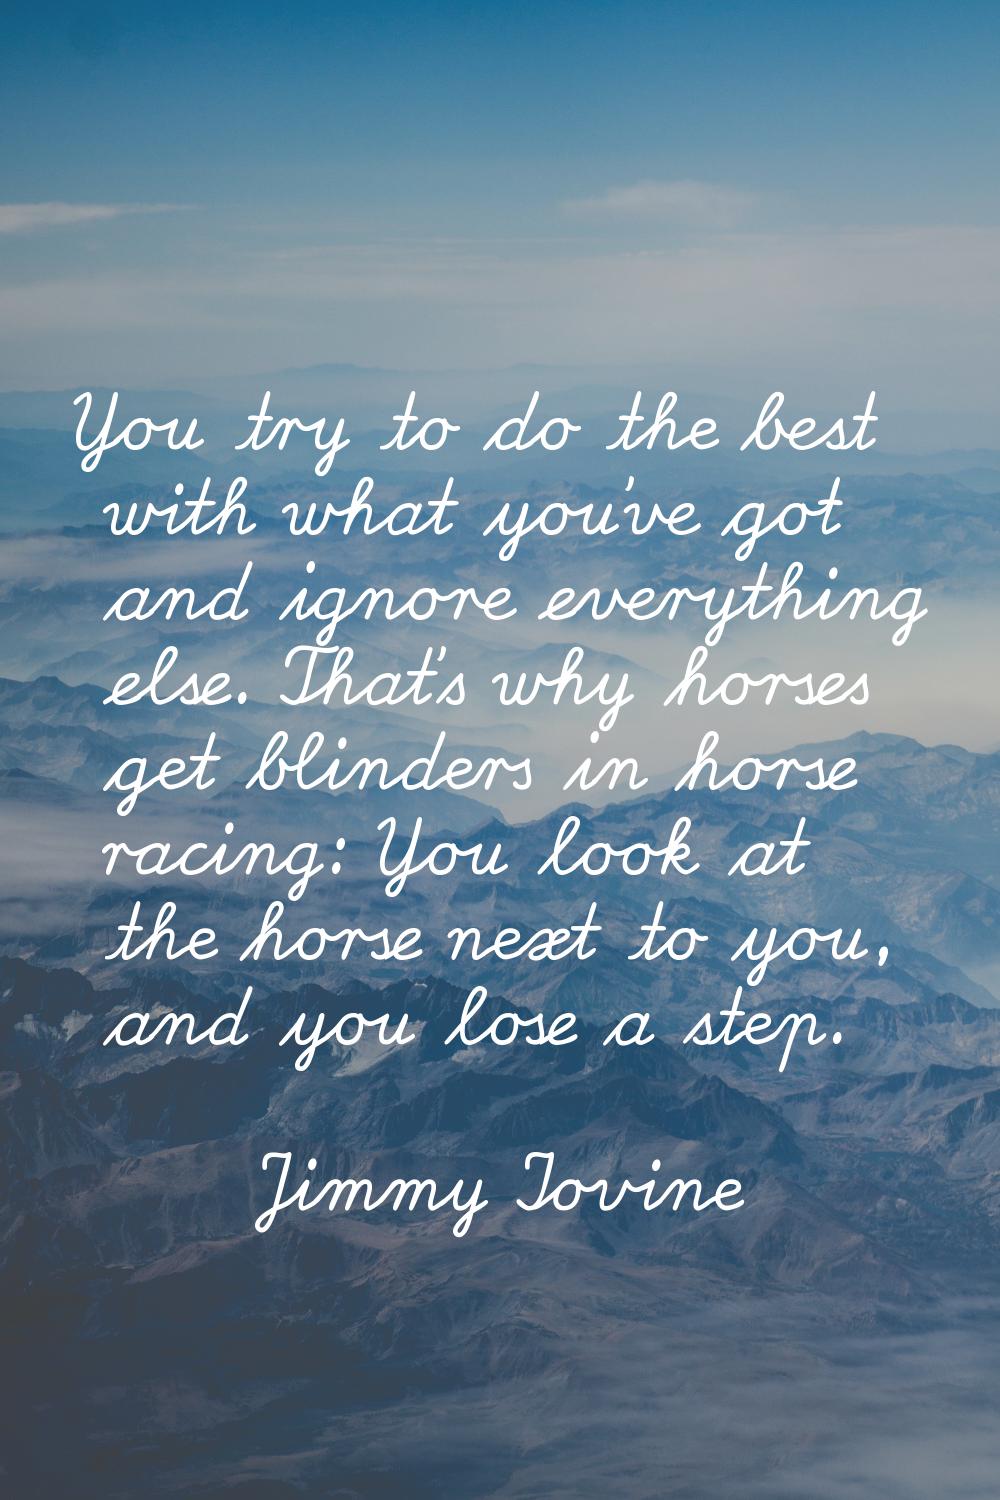 You try to do the best with what you've got and ignore everything else. That's why horses get blind